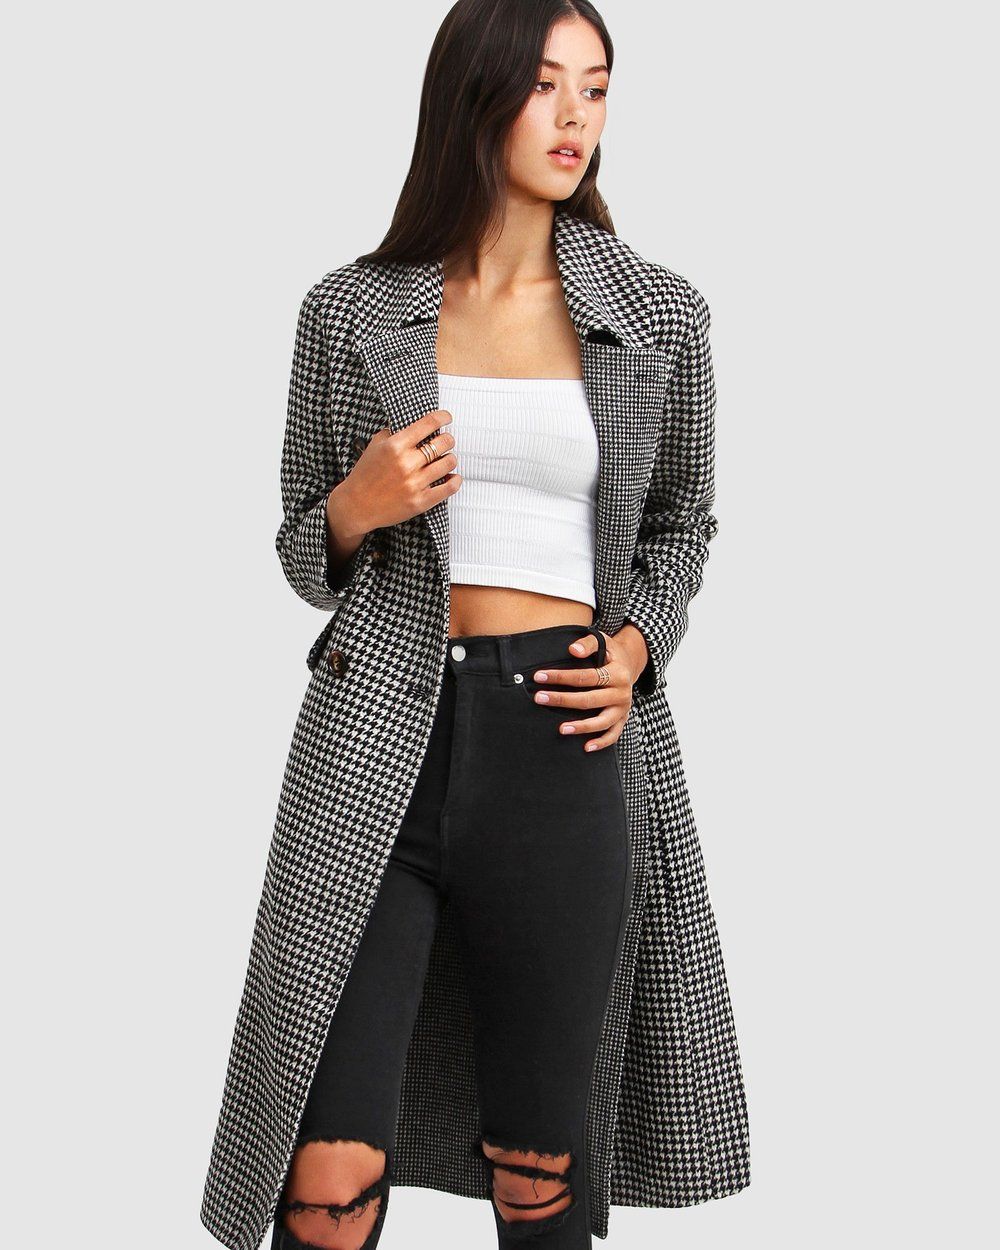 Save My Love Wool Coat | THE ICONIC (AU & NZ)